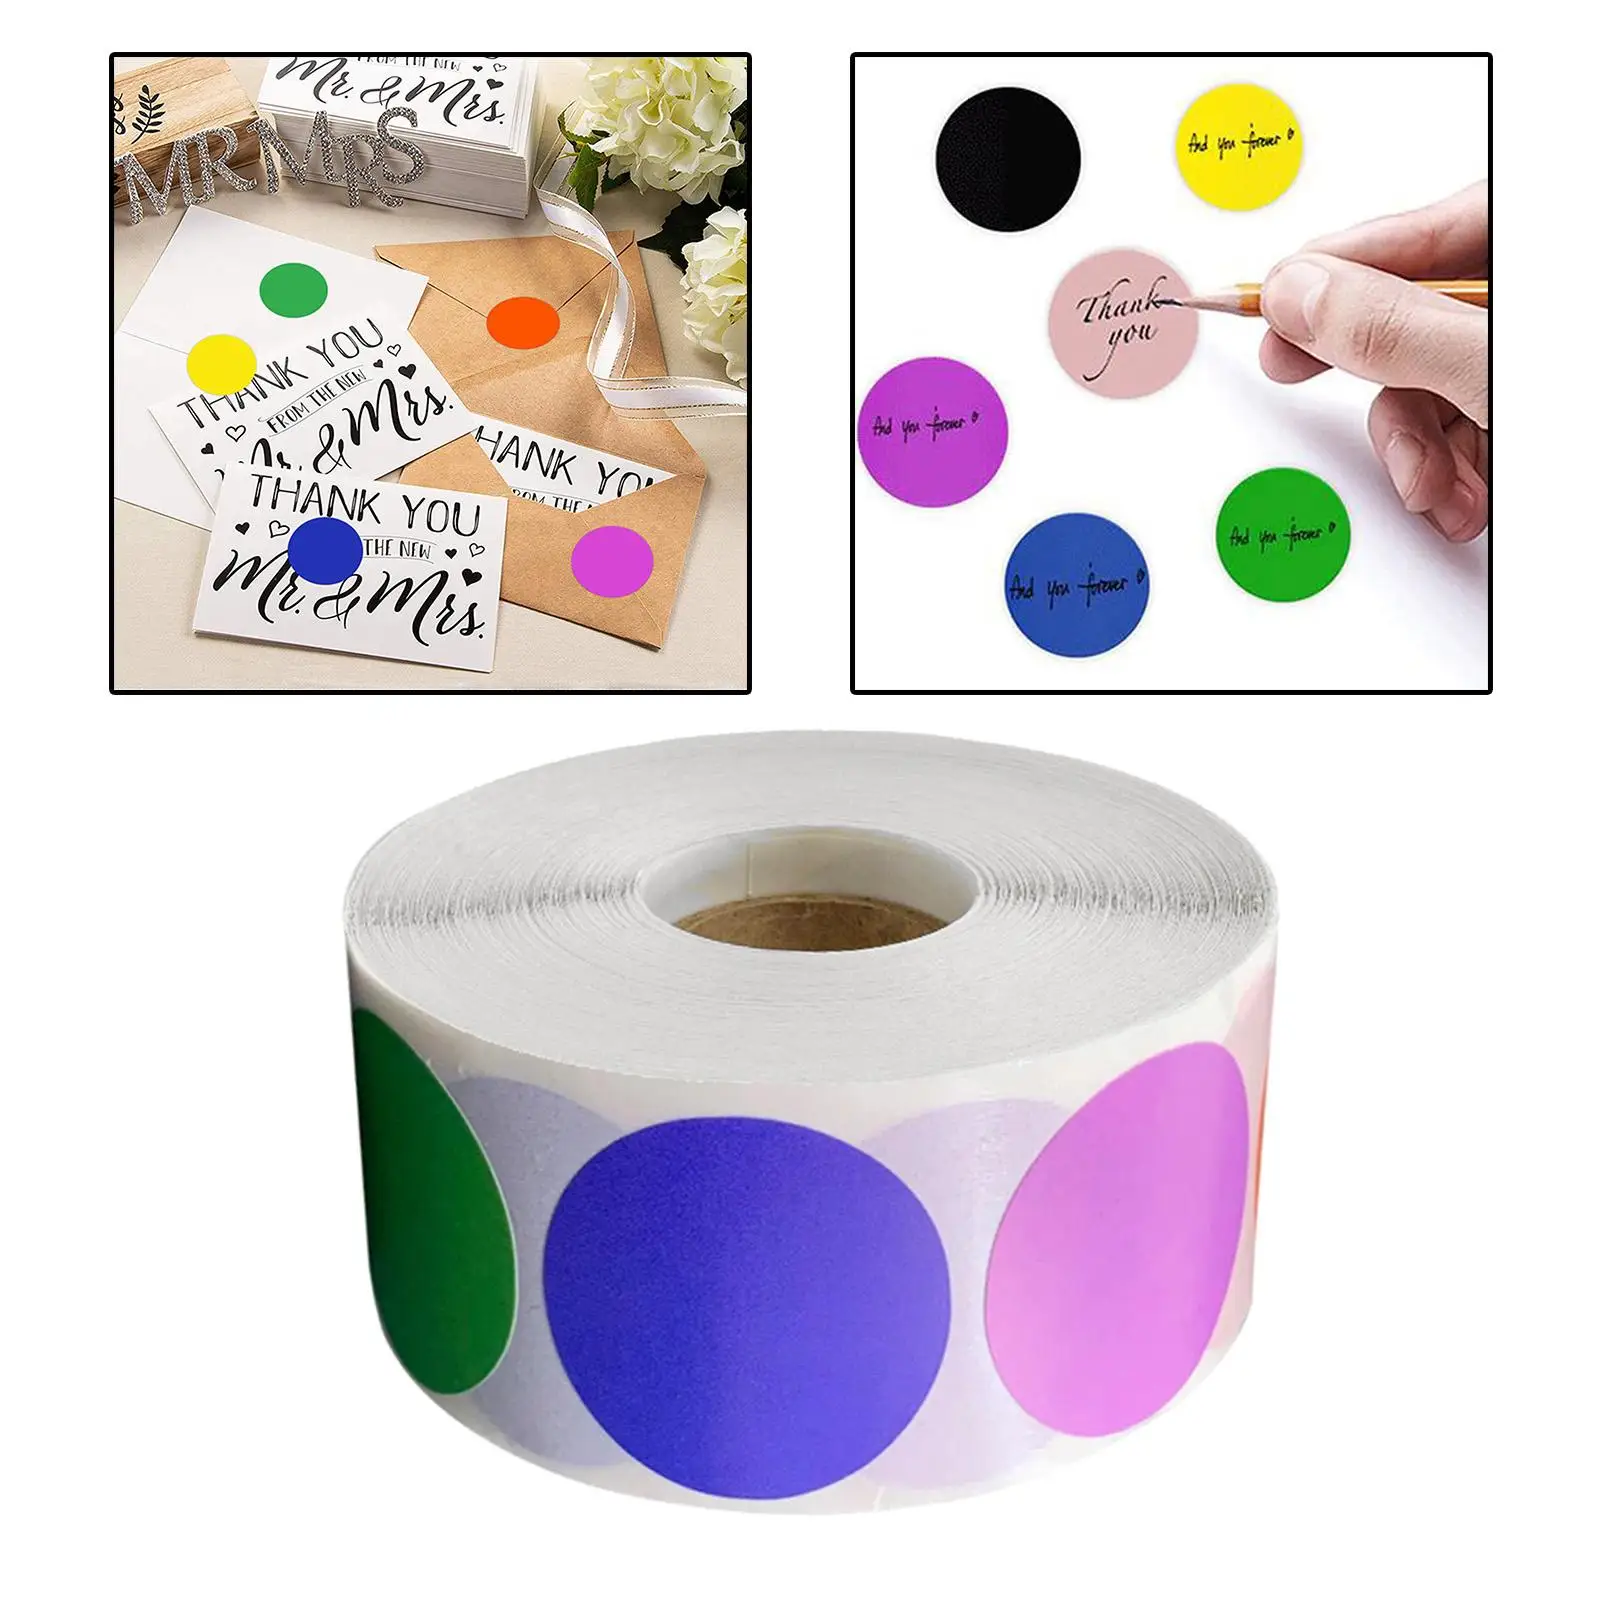 Small 25mm Round / Circular Colour Code Dots /Circles Stickers Sticky Labels